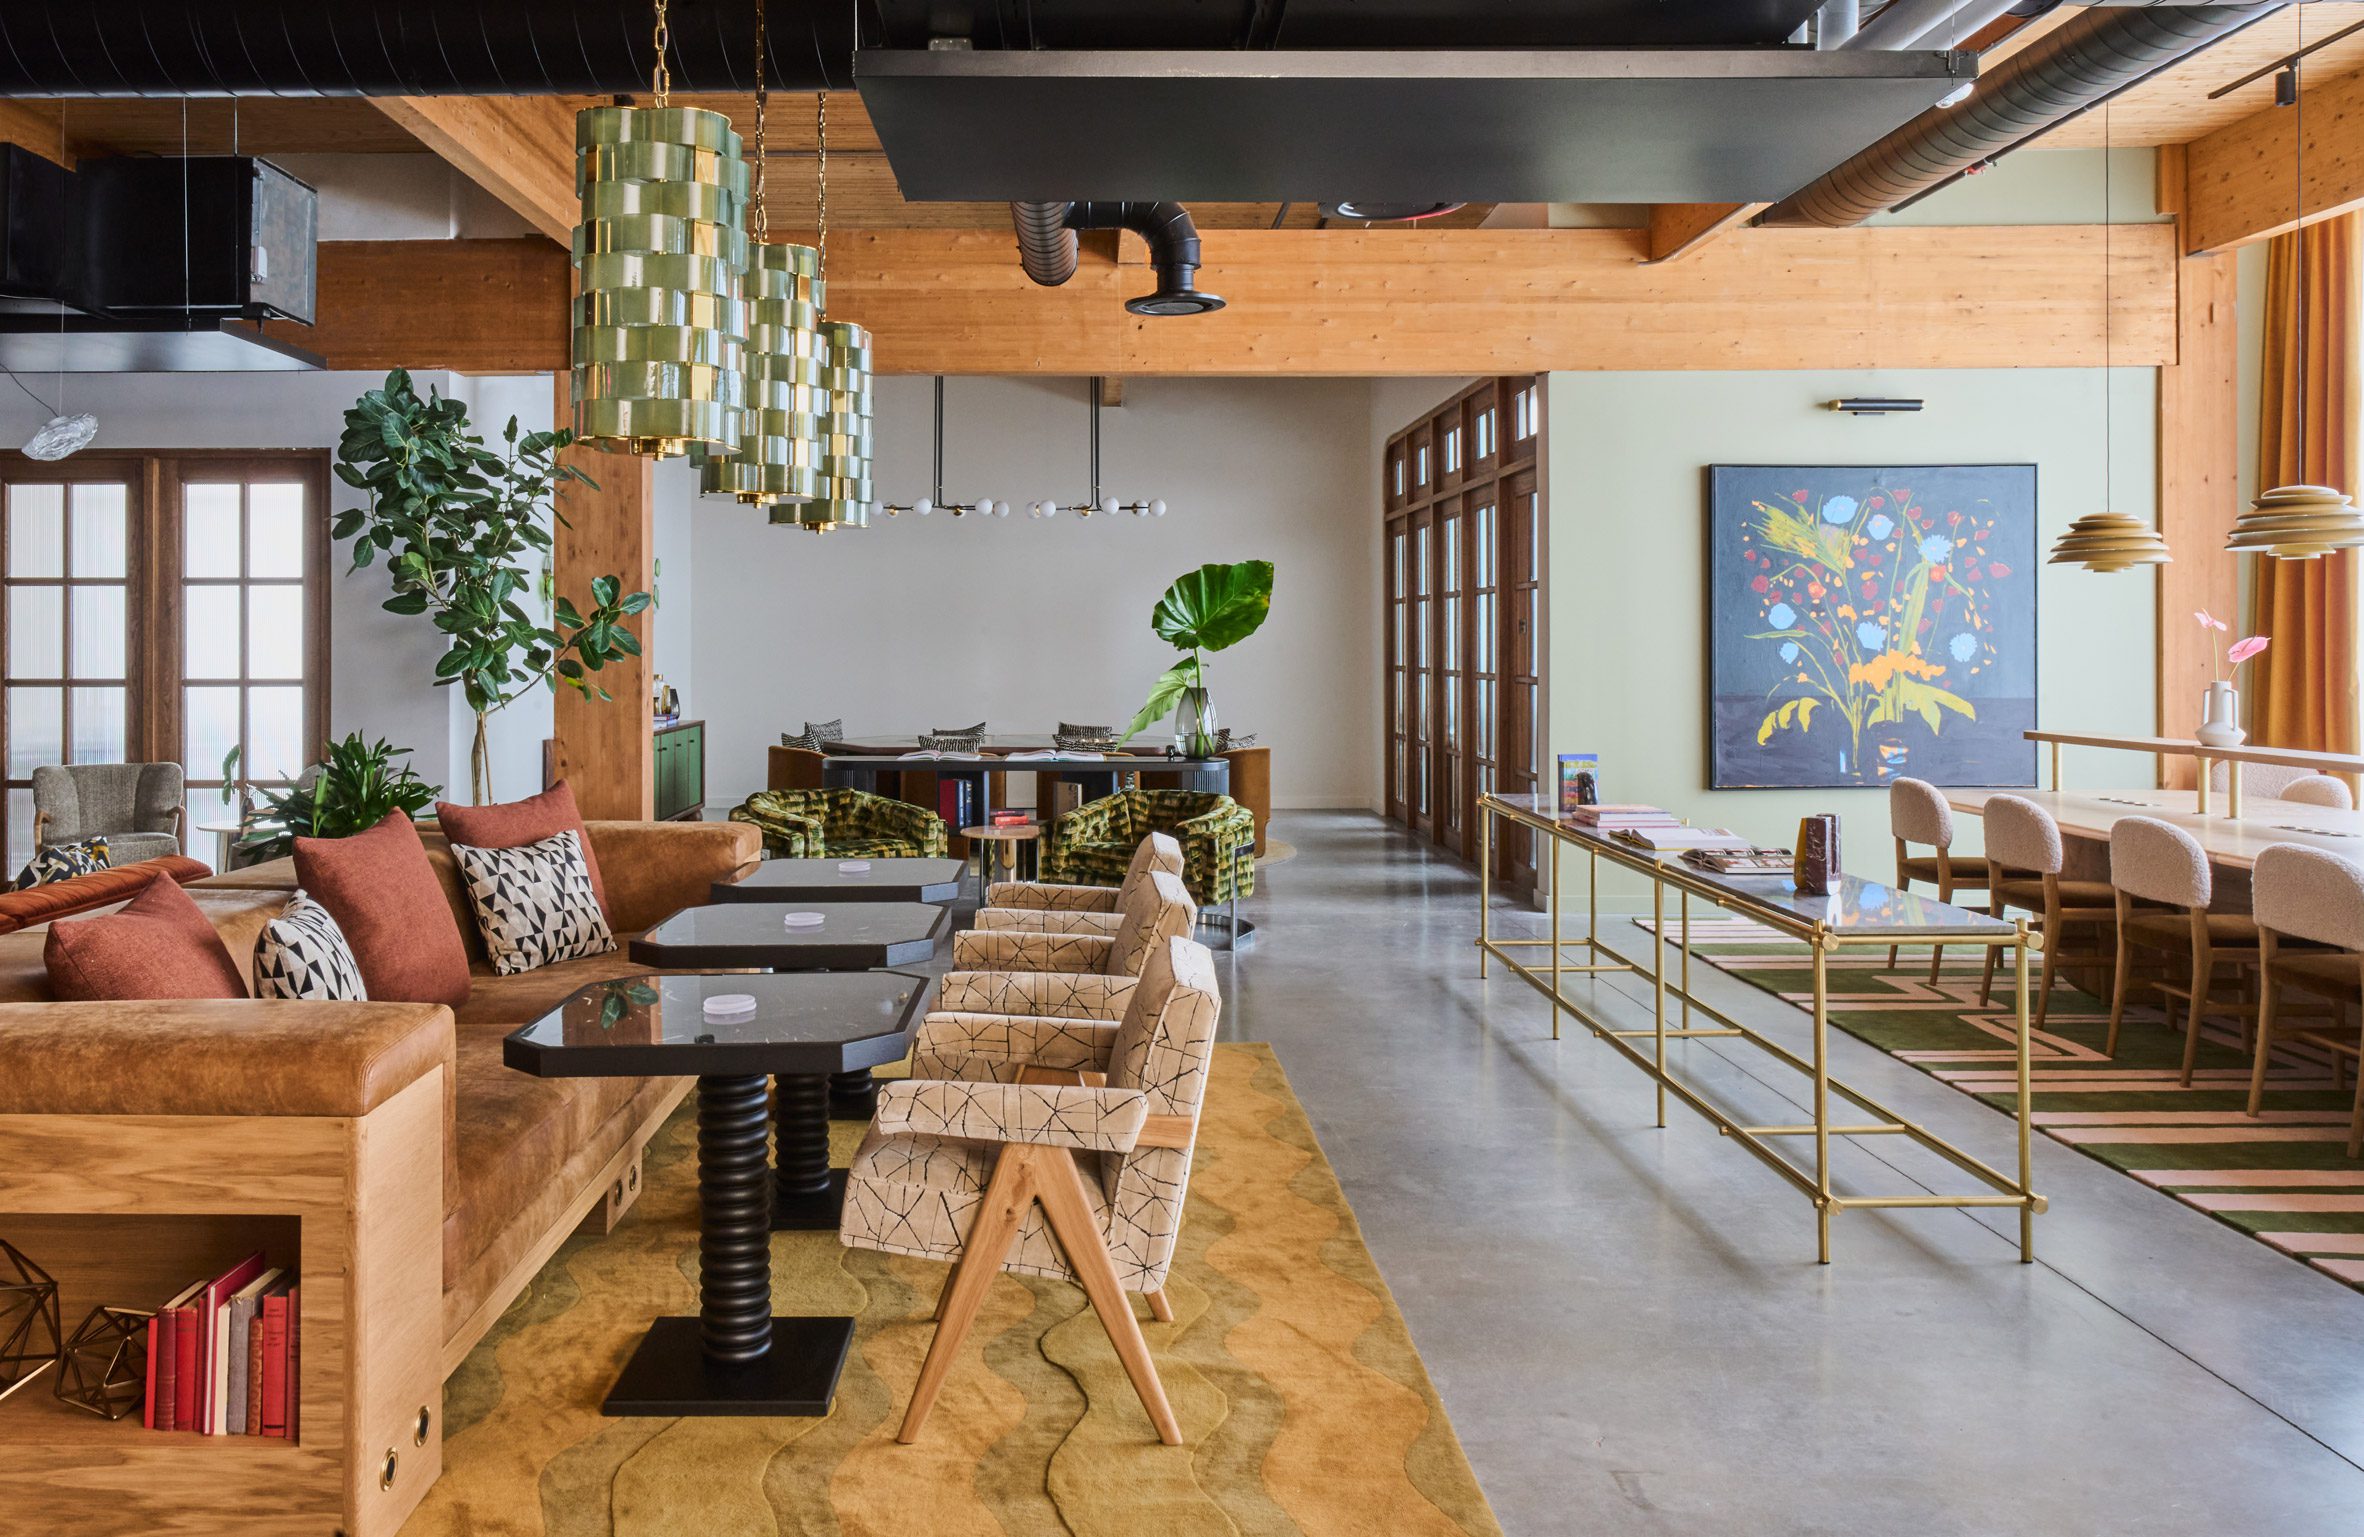 Open-plan space with sofas, armchairs and communal tables